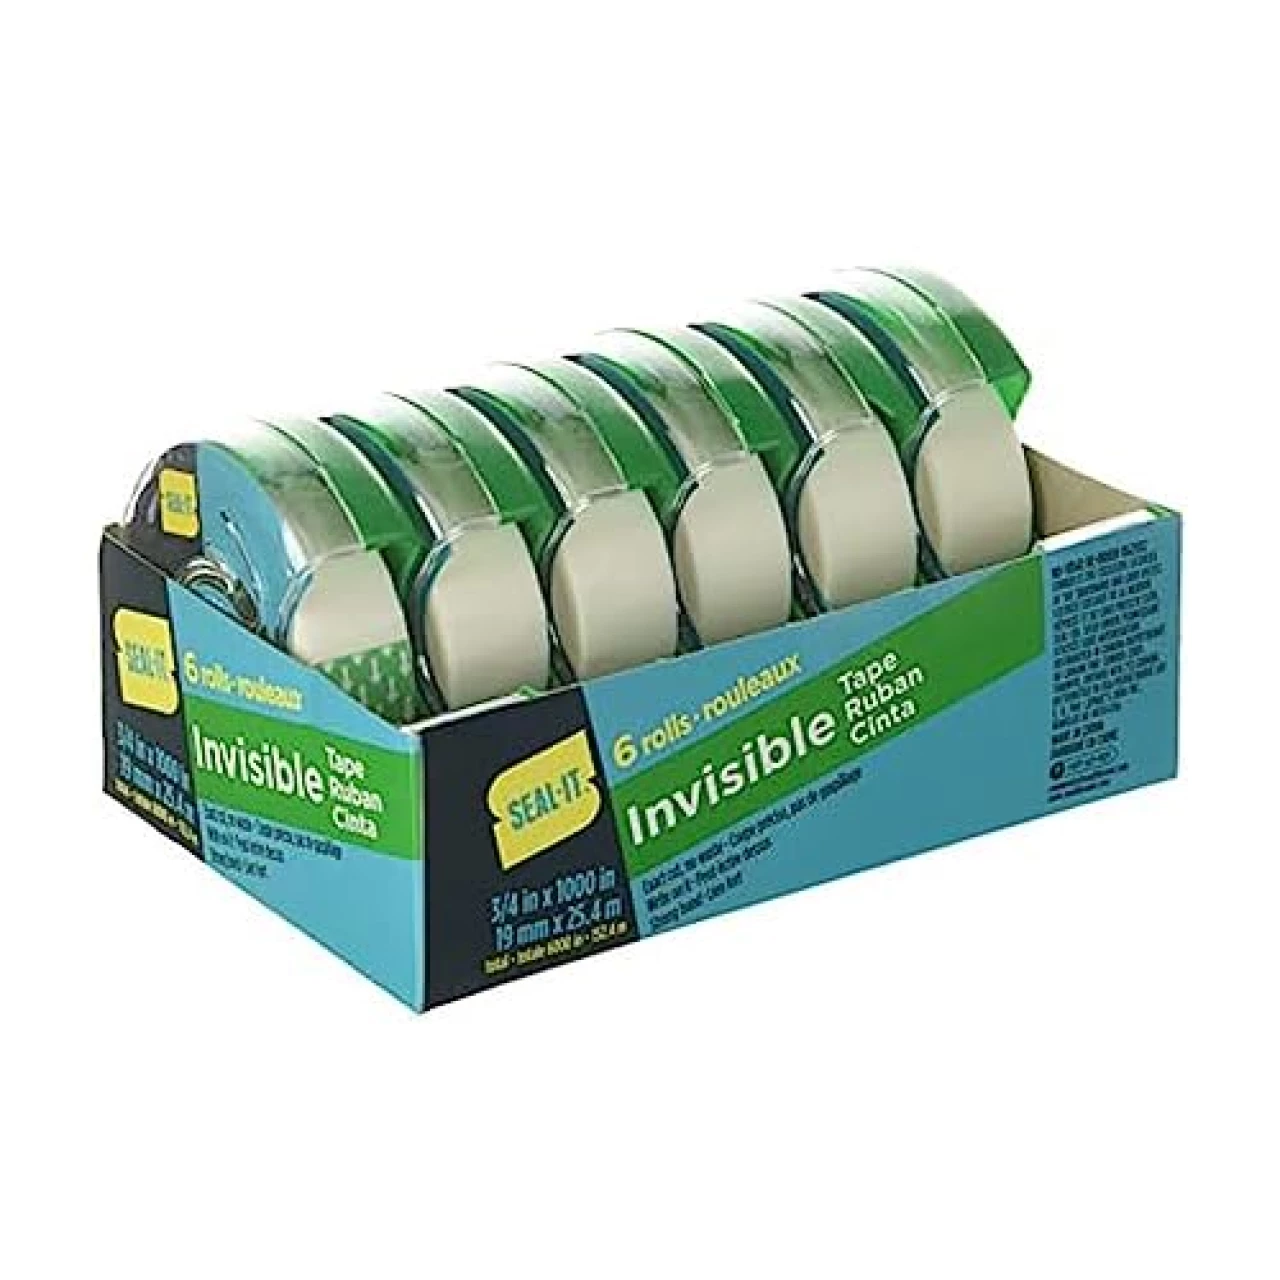 Seal-It Invisible Stationery Tape 3/4 x 1000 Inches On Press N&rsquo; Cut Dispenser, Pack of 6 Total 6000 Inches